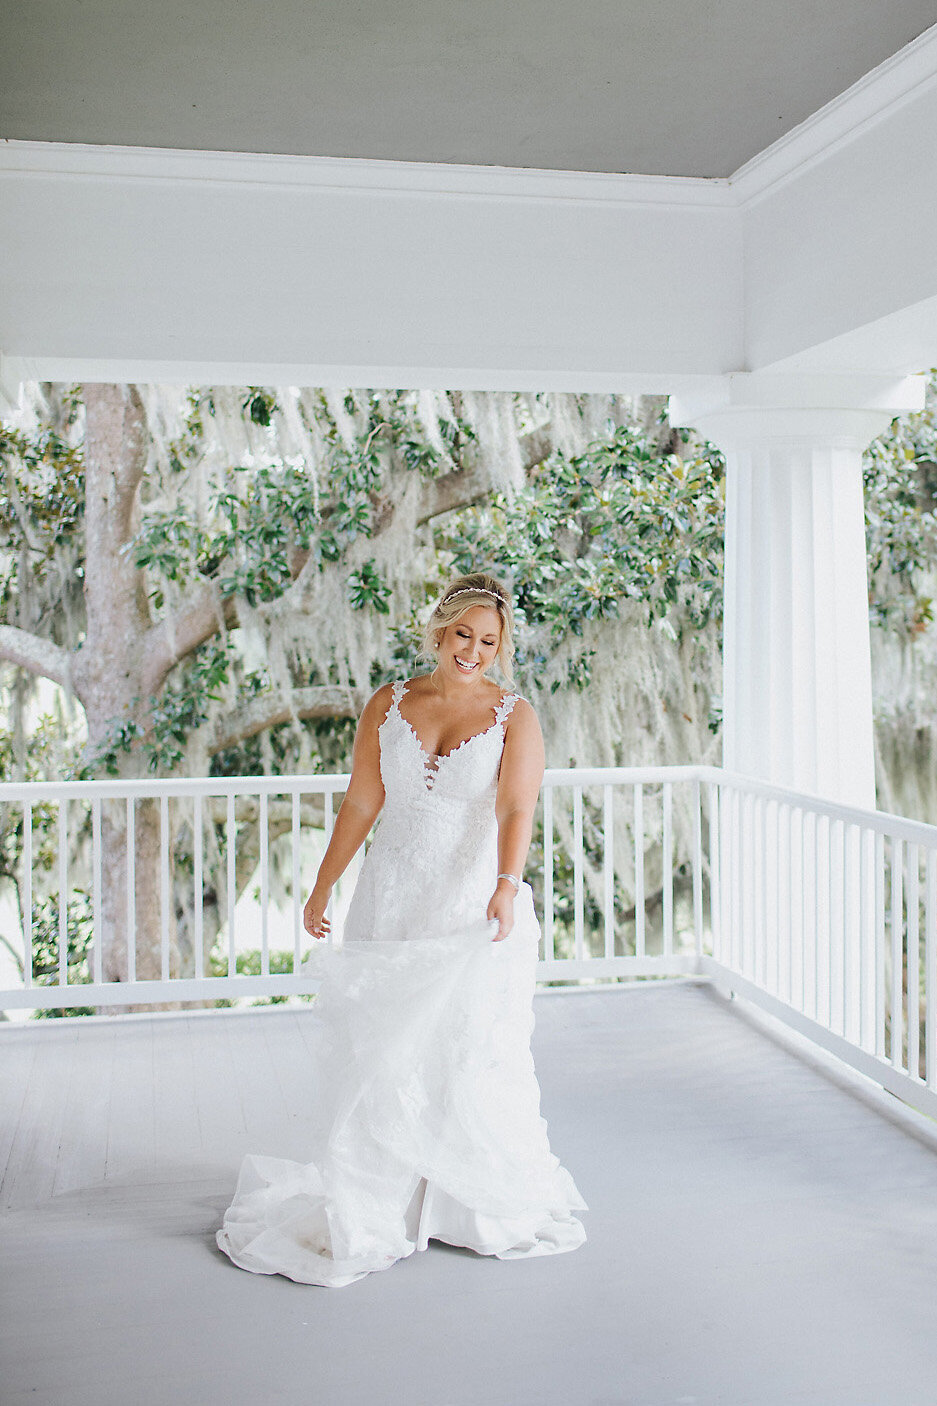 Bride standing on porch with oaks behind her.